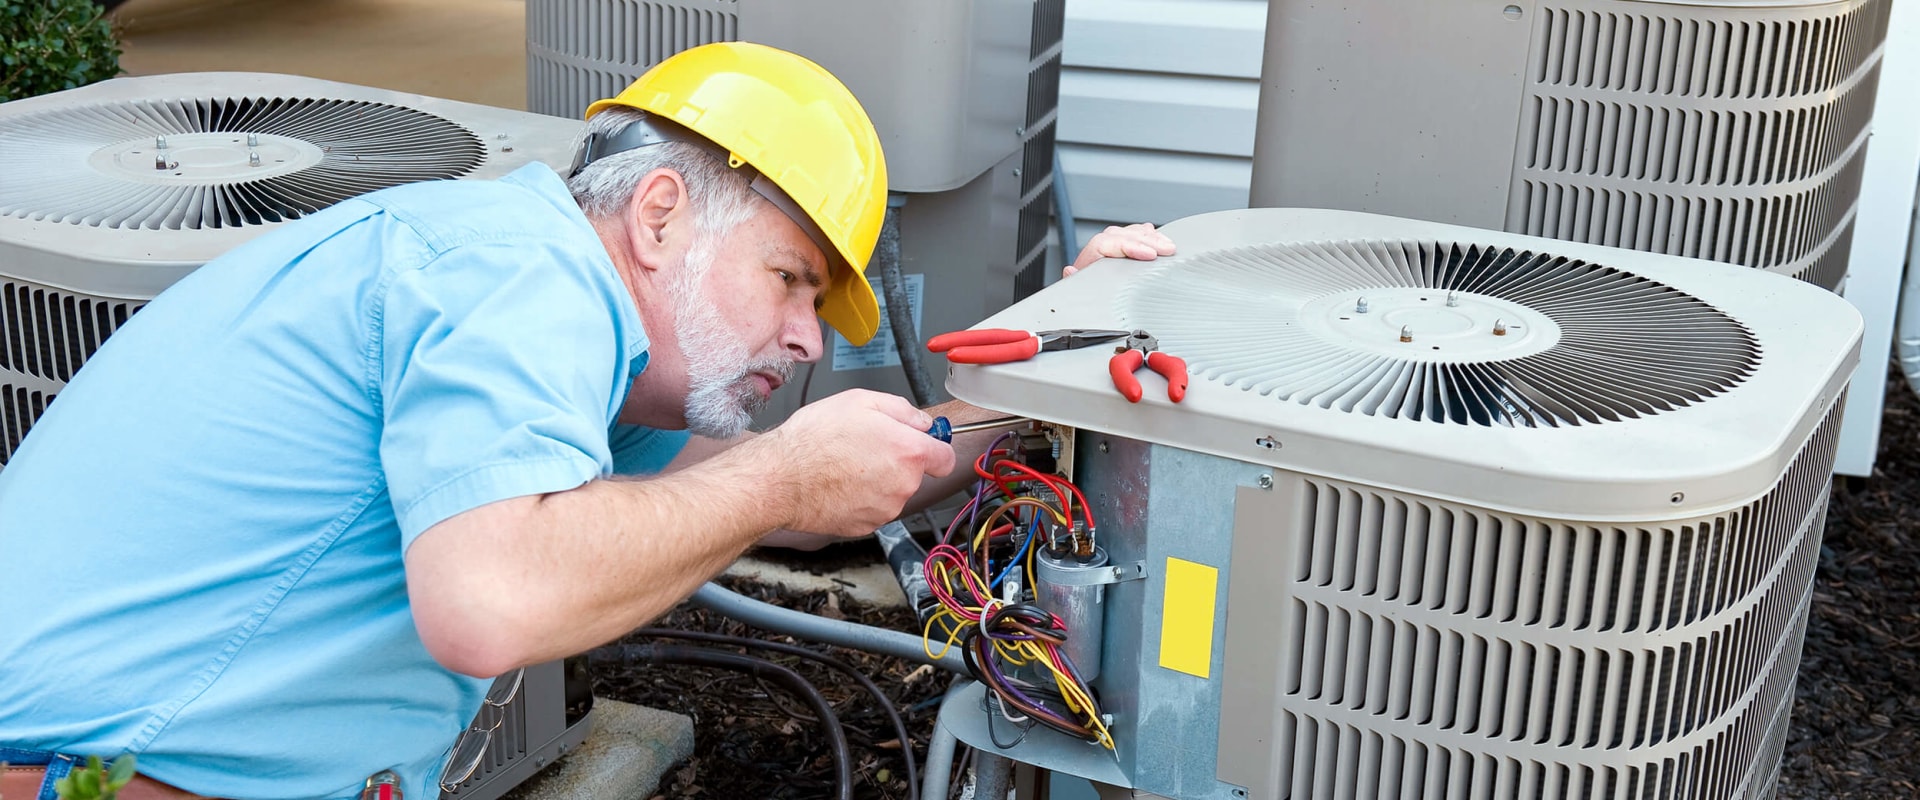 What Type of Warranty is Offered on HVAC Systems Installed in Davie, FL?